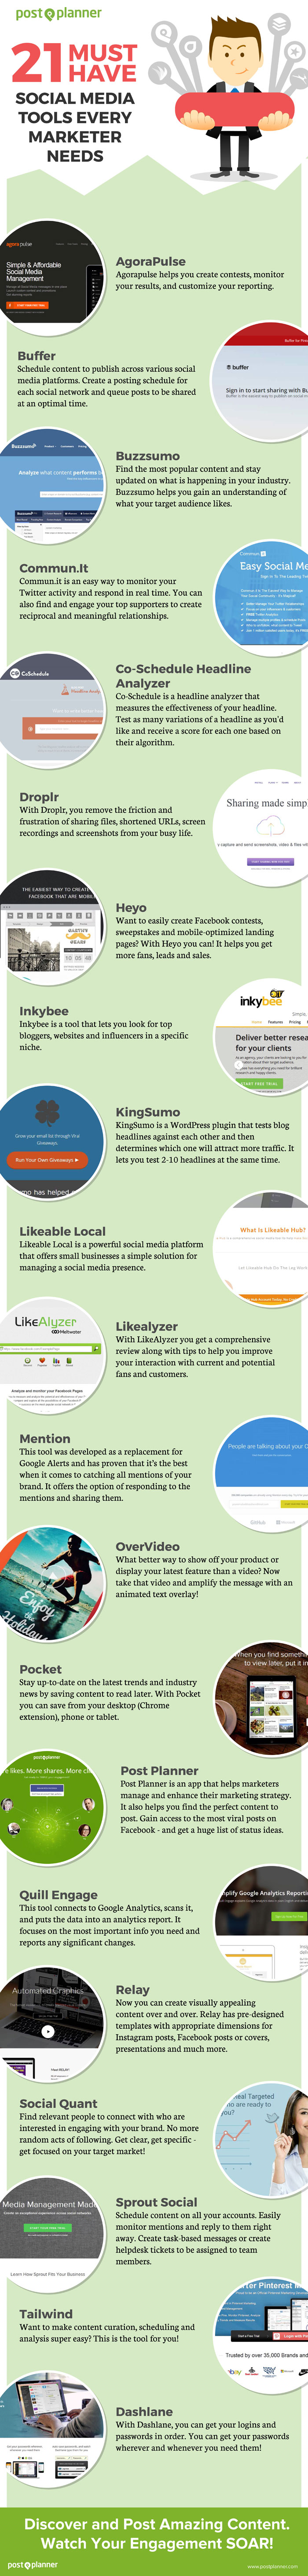 Social-Media-Tools-Marketer-Needs-Infographic-1